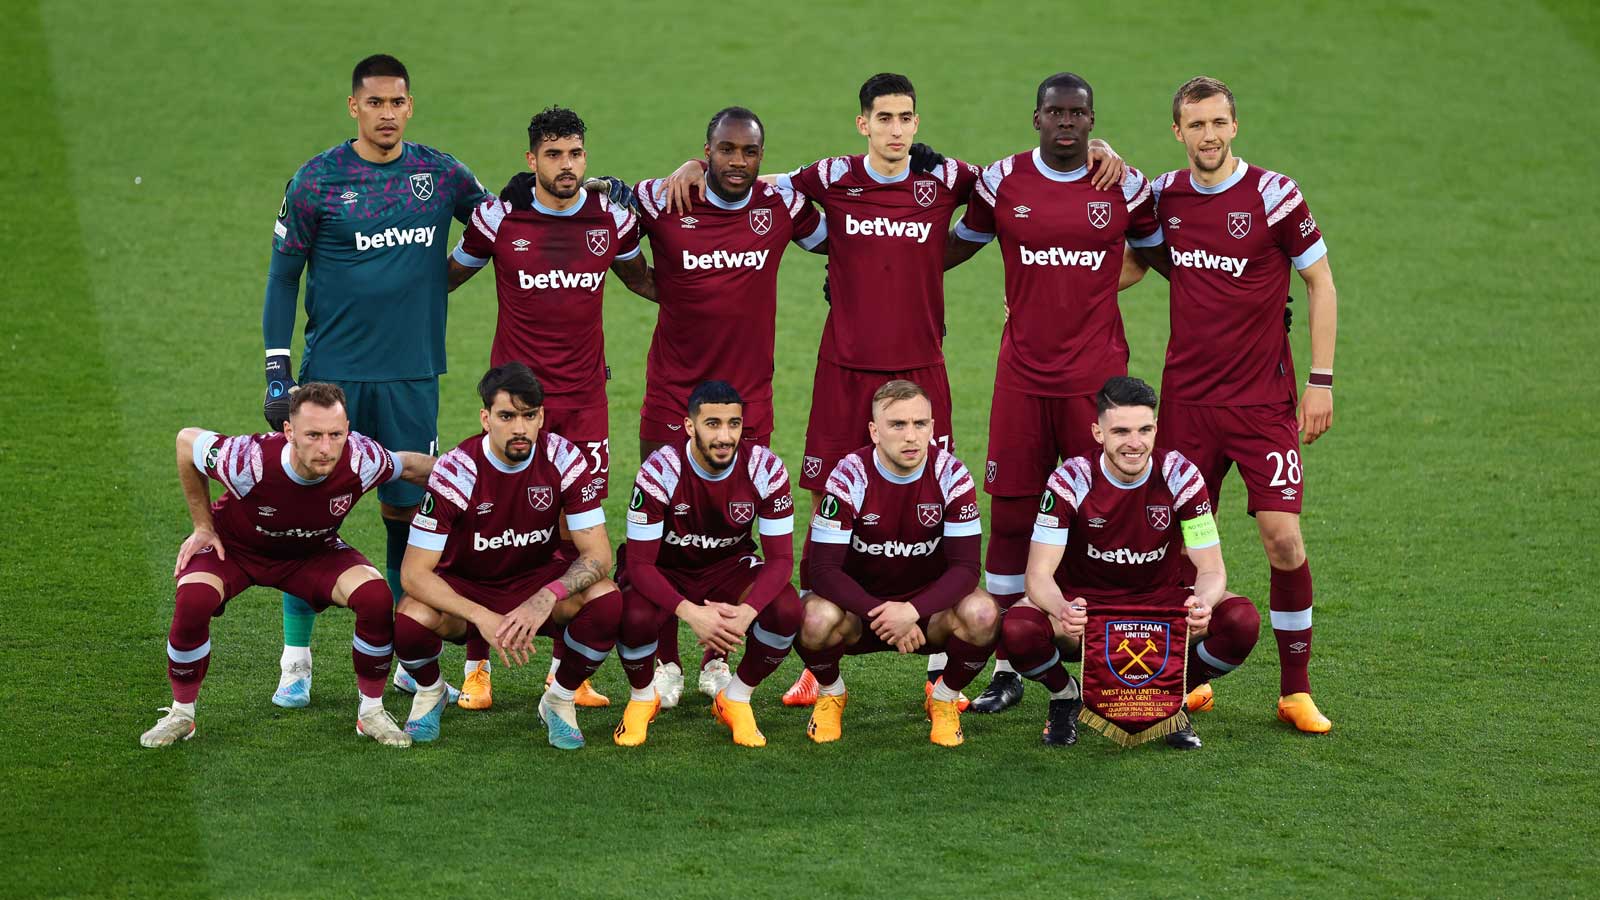 The Hammers line-up against Gent